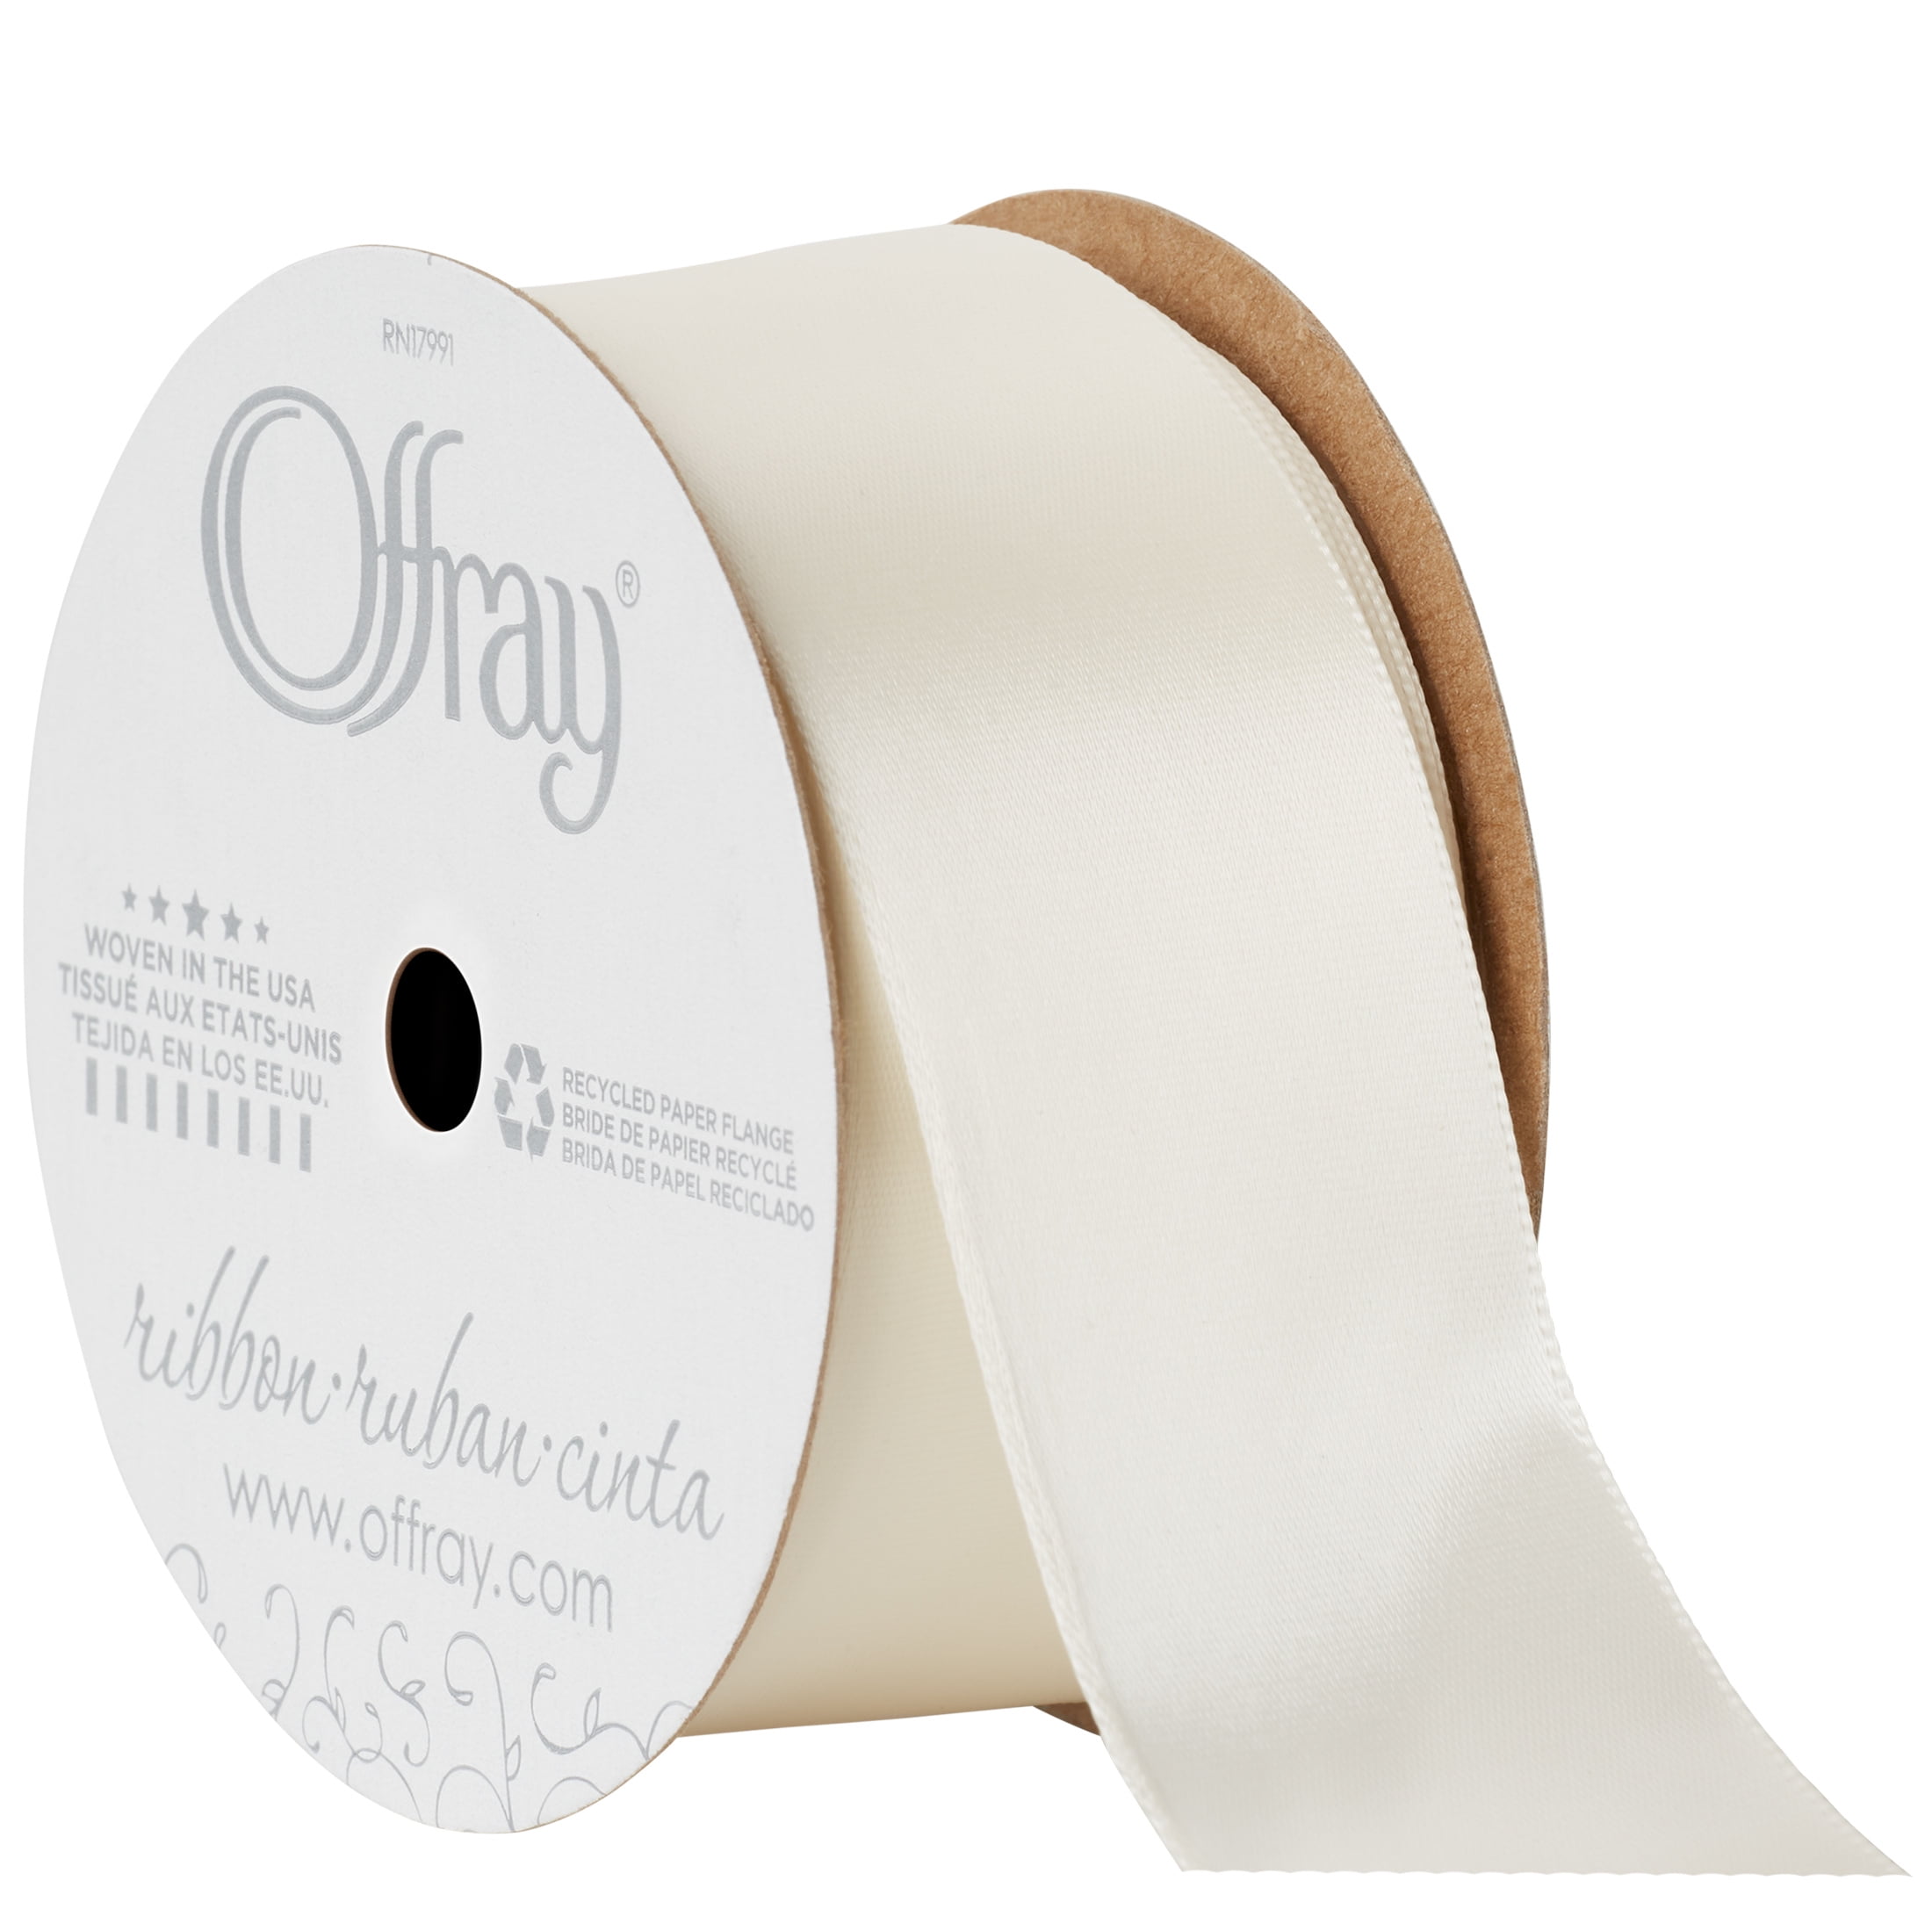 Offray Ribbon, Antique White 1 1/2 inch Single Face Satin Polyester Ribbon, 12 feet